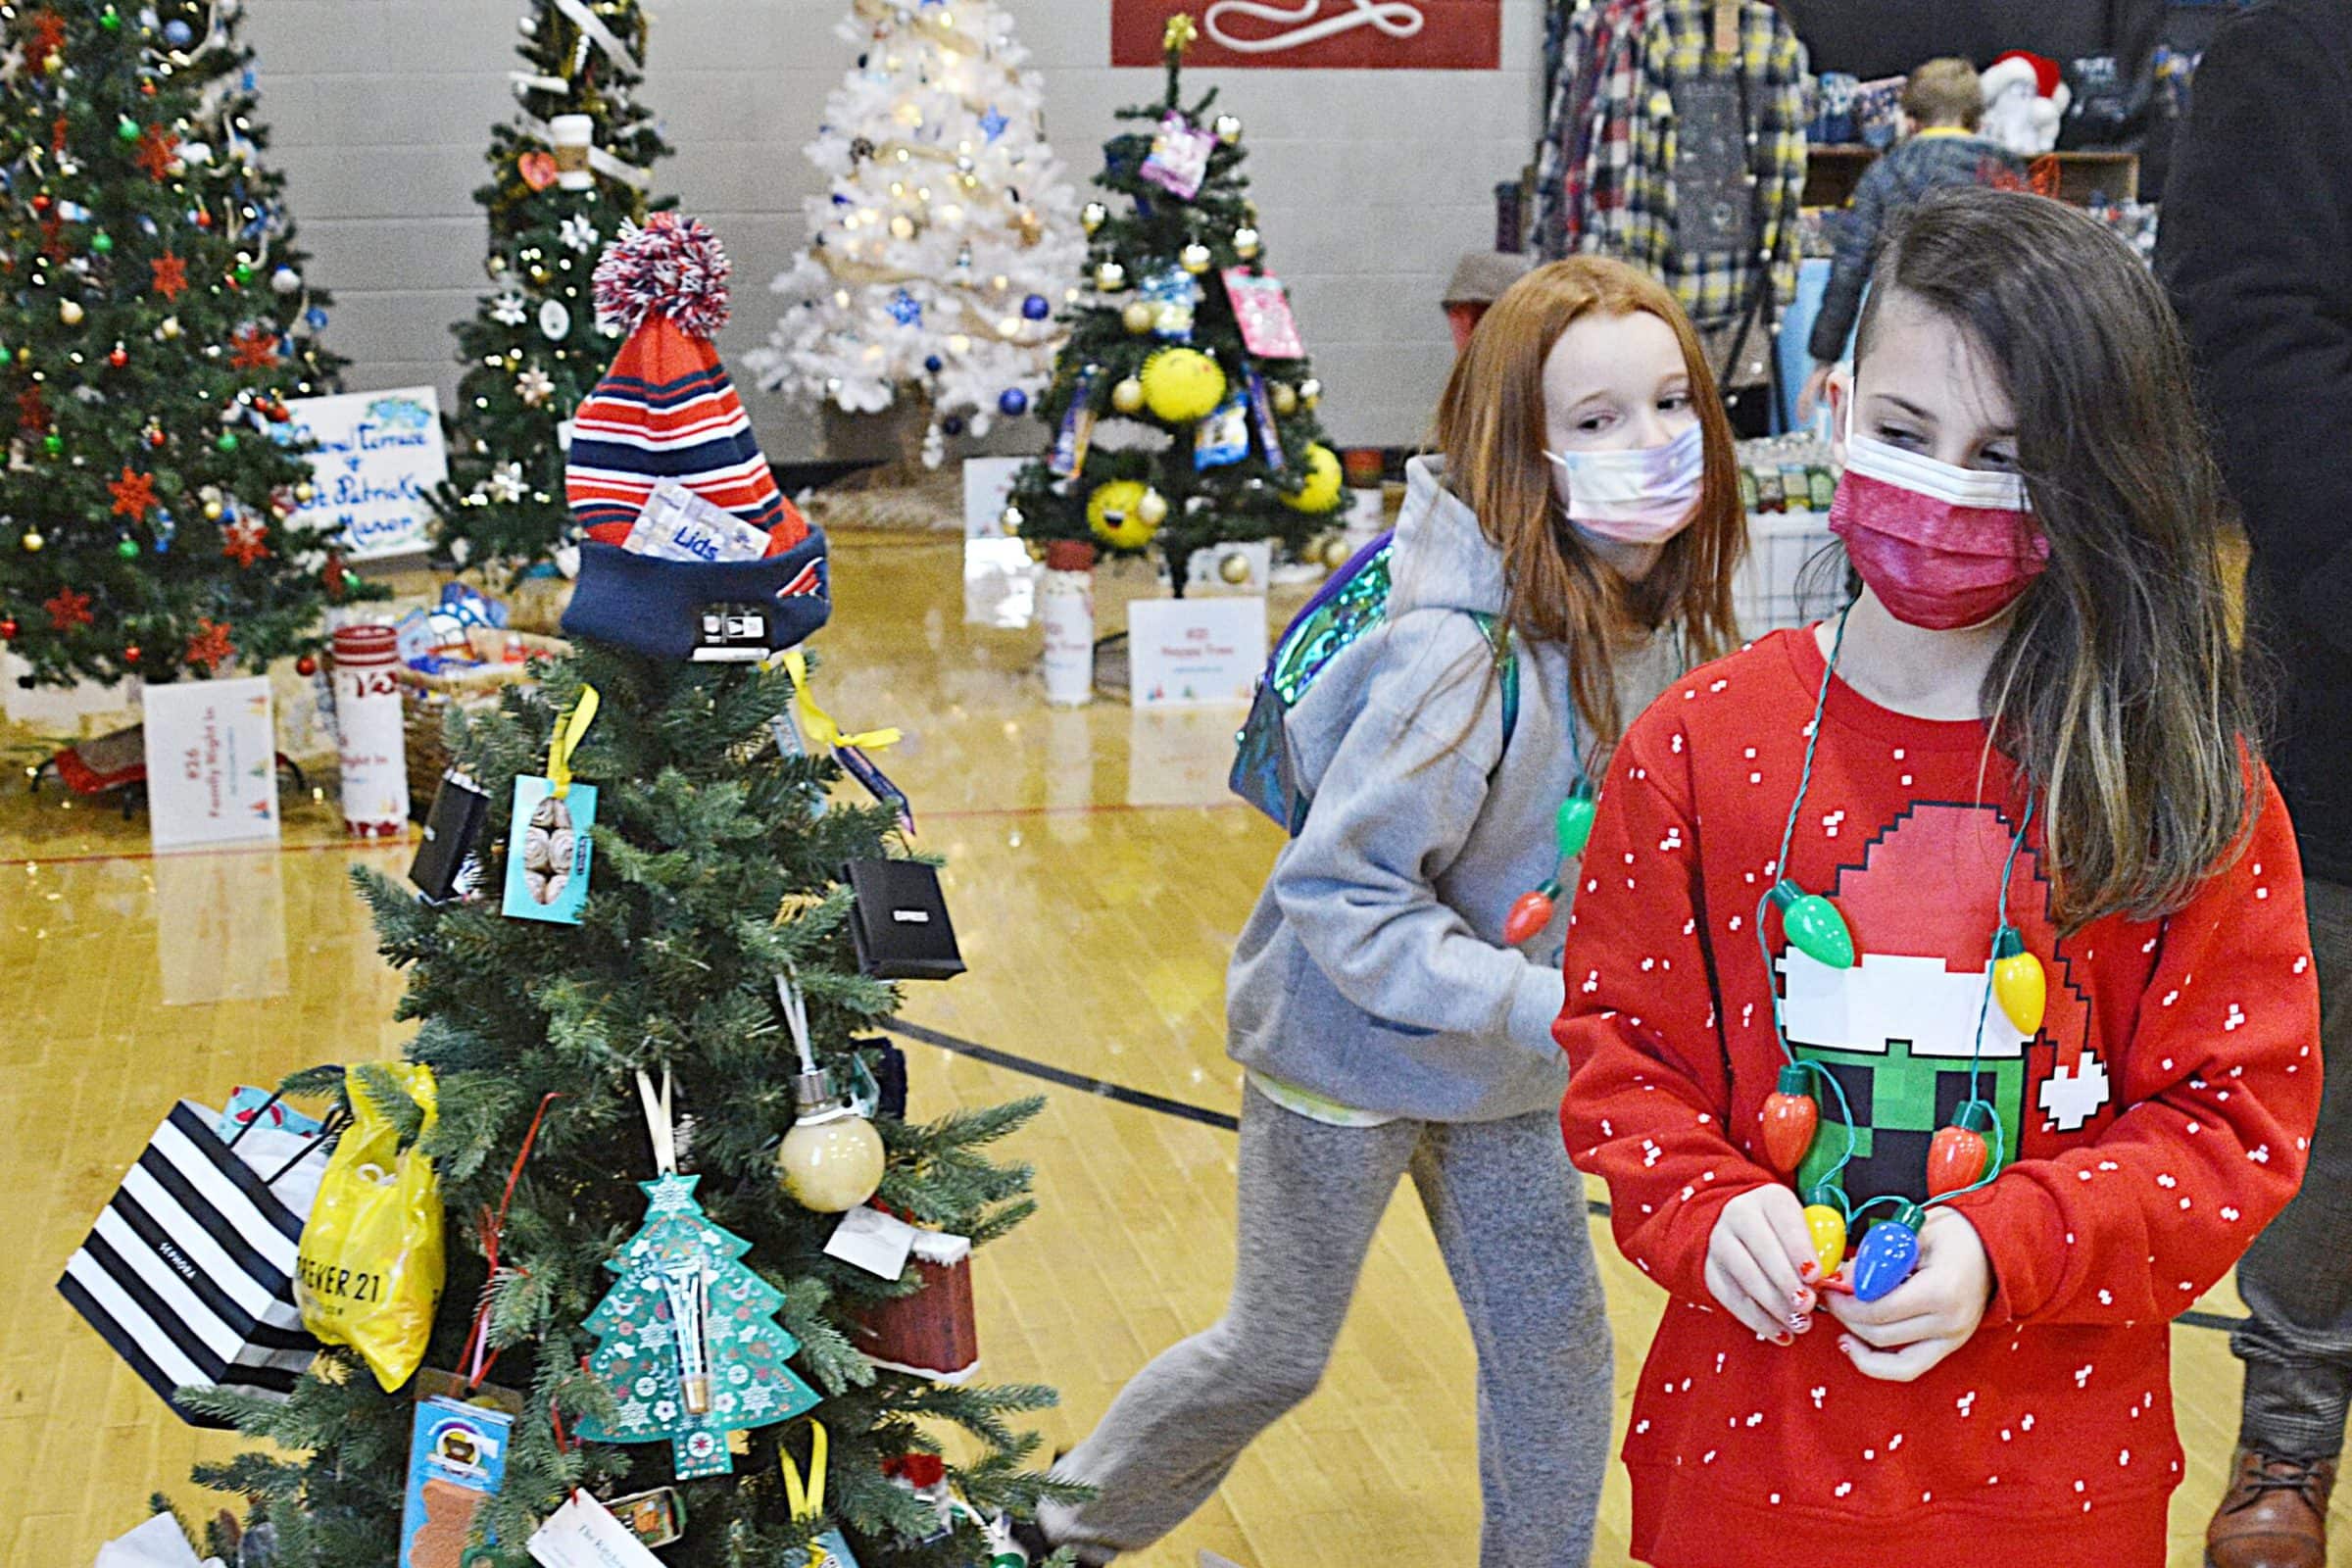 Boys &#038; Girls Clubs of MetroWest hosts trees fest and craft fair